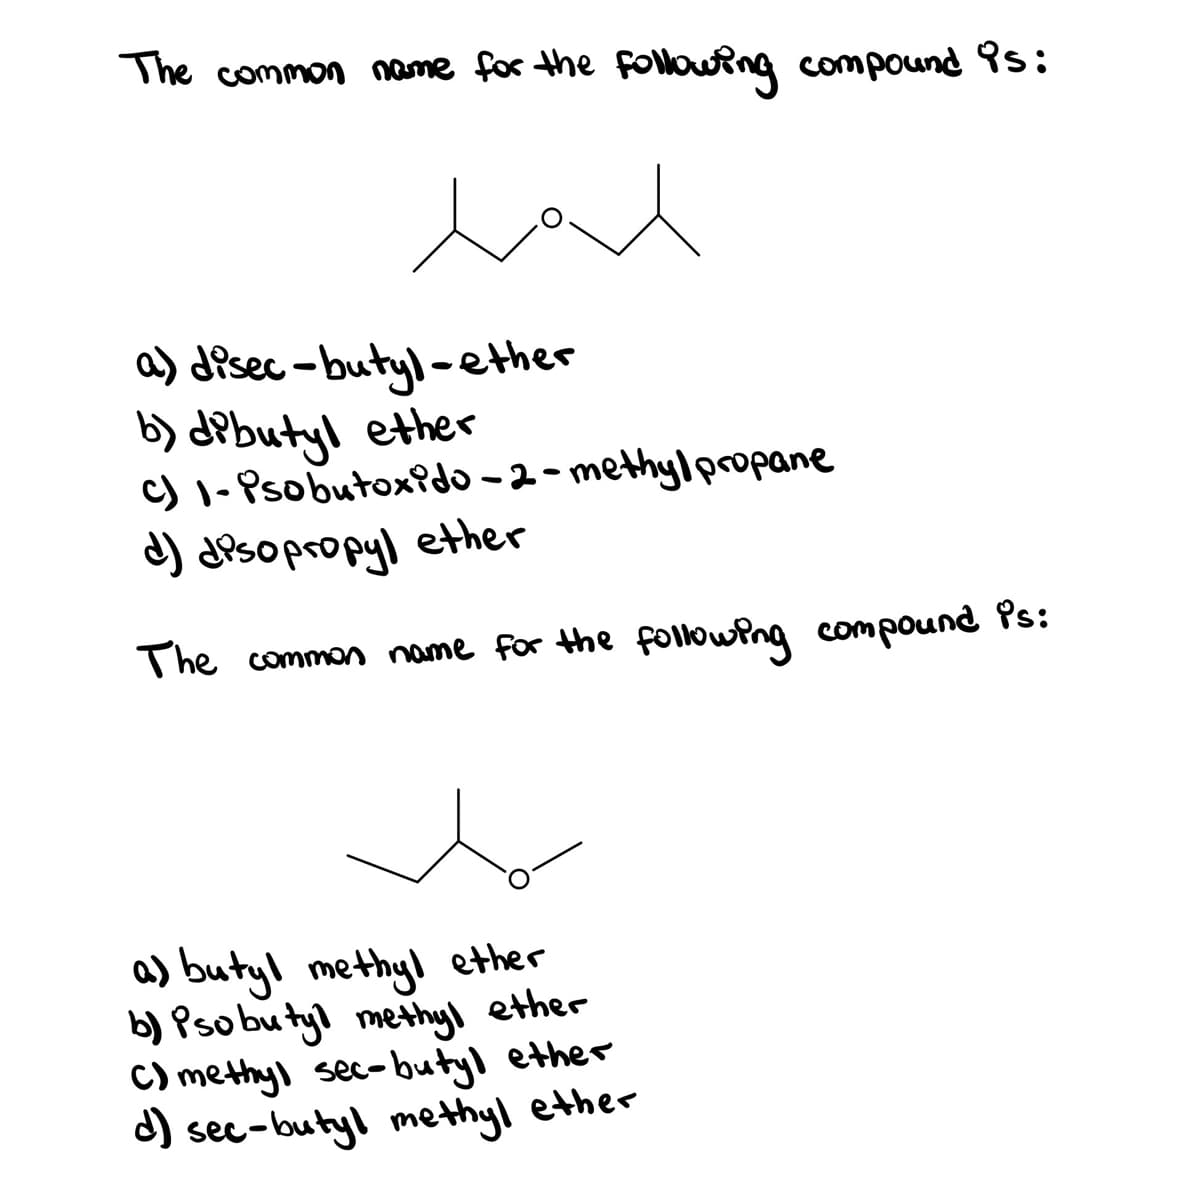 The common name for the Following compound 9s:
a) disec -butyl-ether
b) dPbutyl ether
c) 1- Psobutox?do – 2 - methyl propane
d) disopropyl ether
The common name for the followPng compound Ps:
a) butyl methyl ether
b) Pso bu tyl methyl ether
C) methyl sec-butyl ether
d) sec-butyl methyl ether
